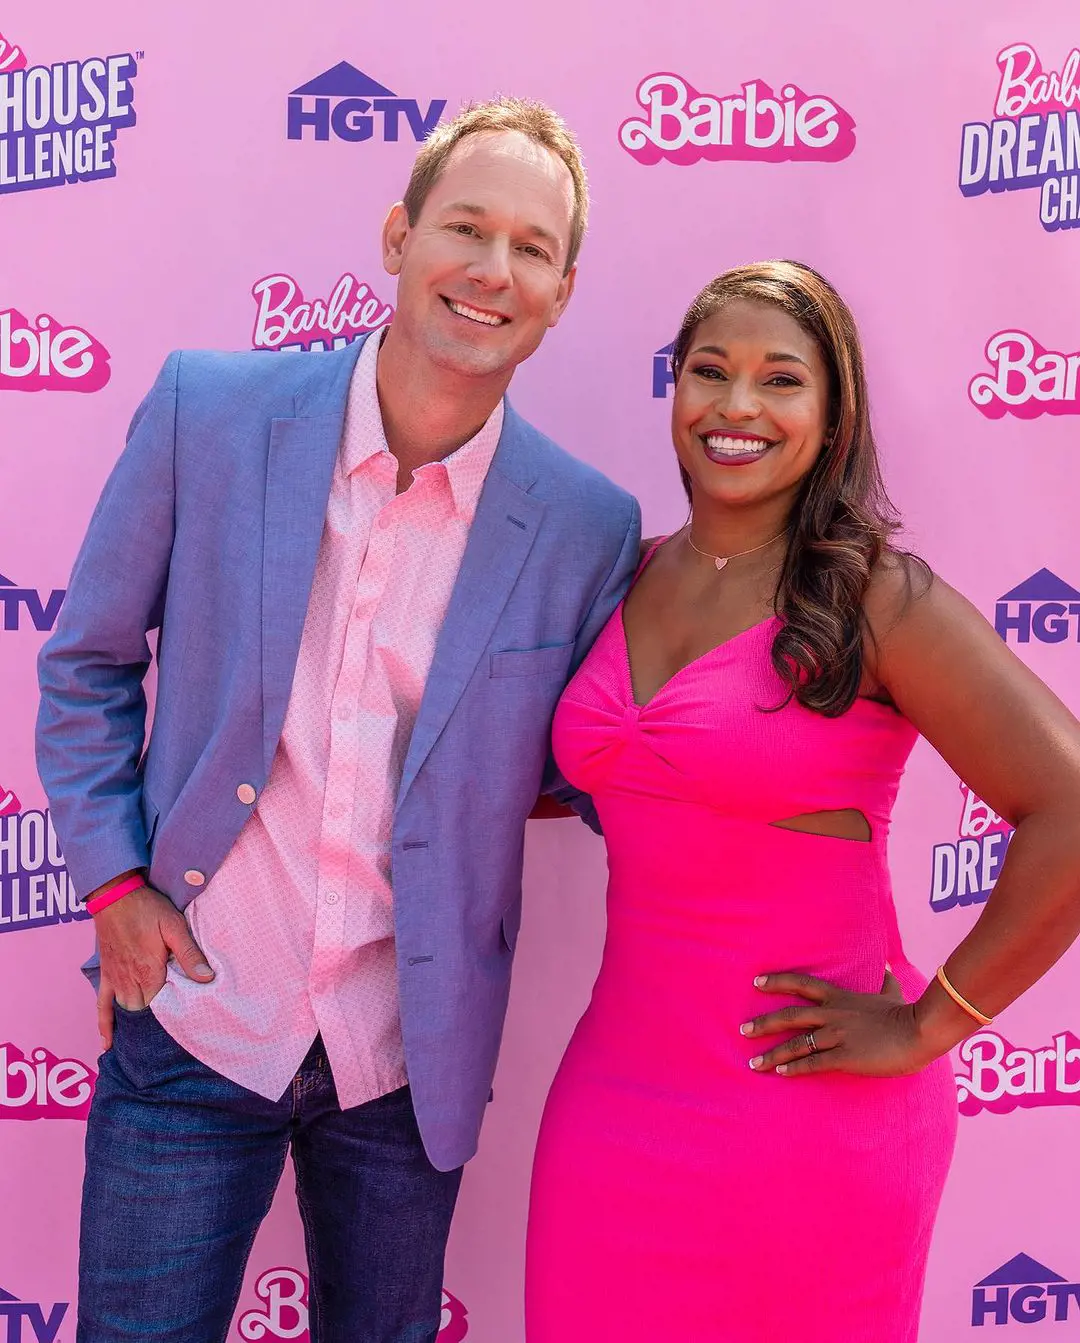 Brian and Mika Kleinschmidt are the ultimate winner of the HGTV competition show Barbie's Dream House Challenge